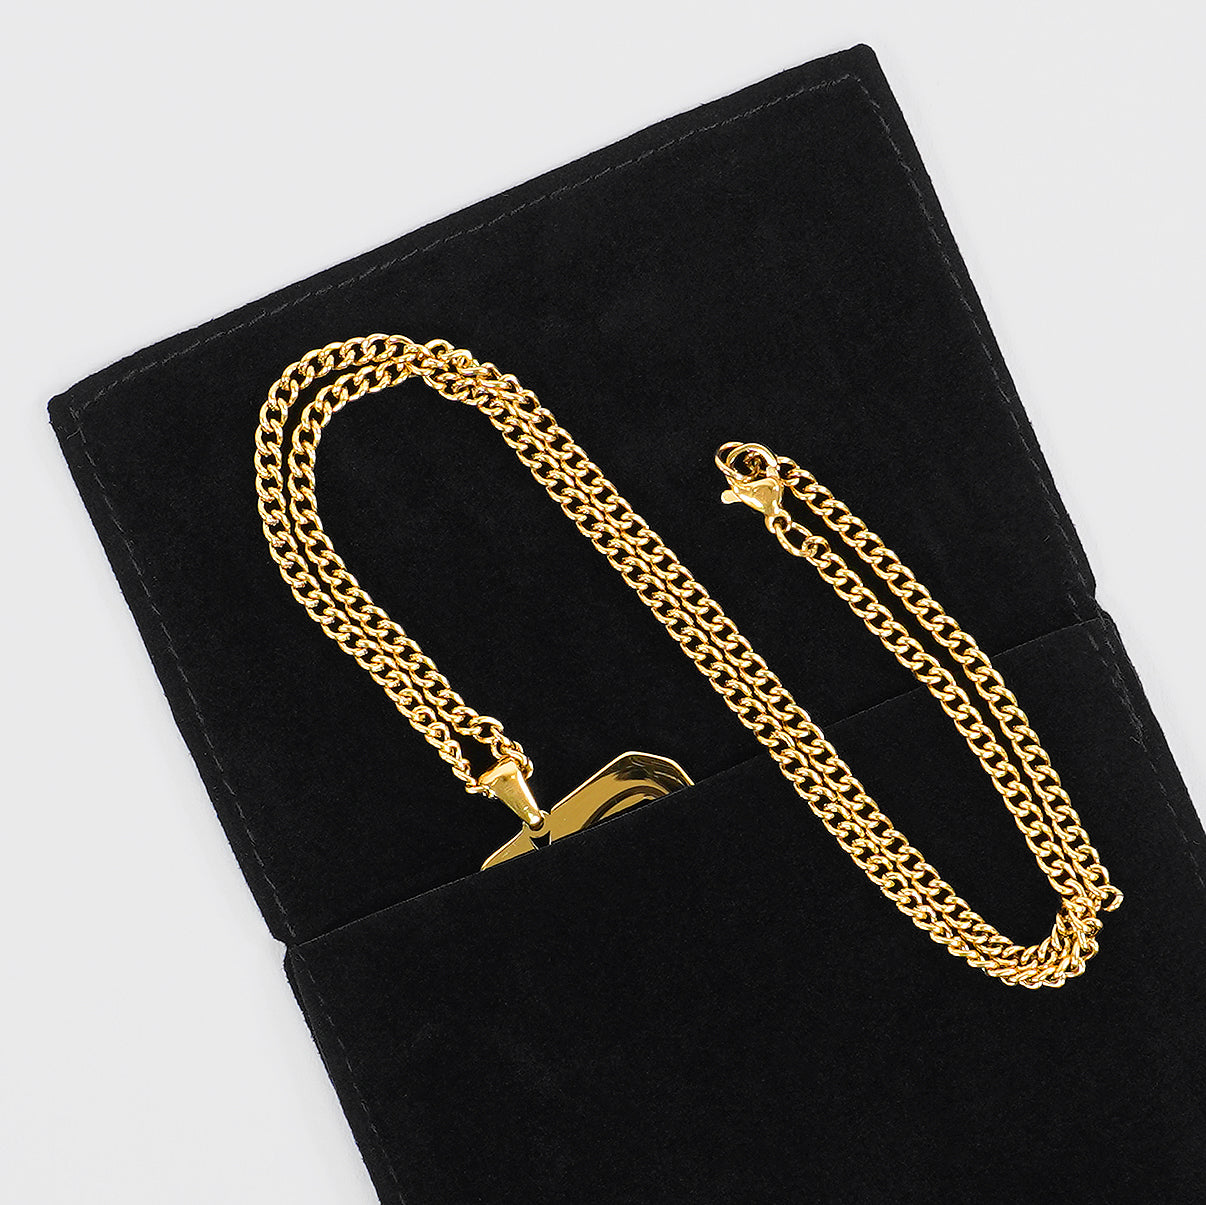 79 Number Pendant with Chain Necklace - Gold Plated Stainless Steel